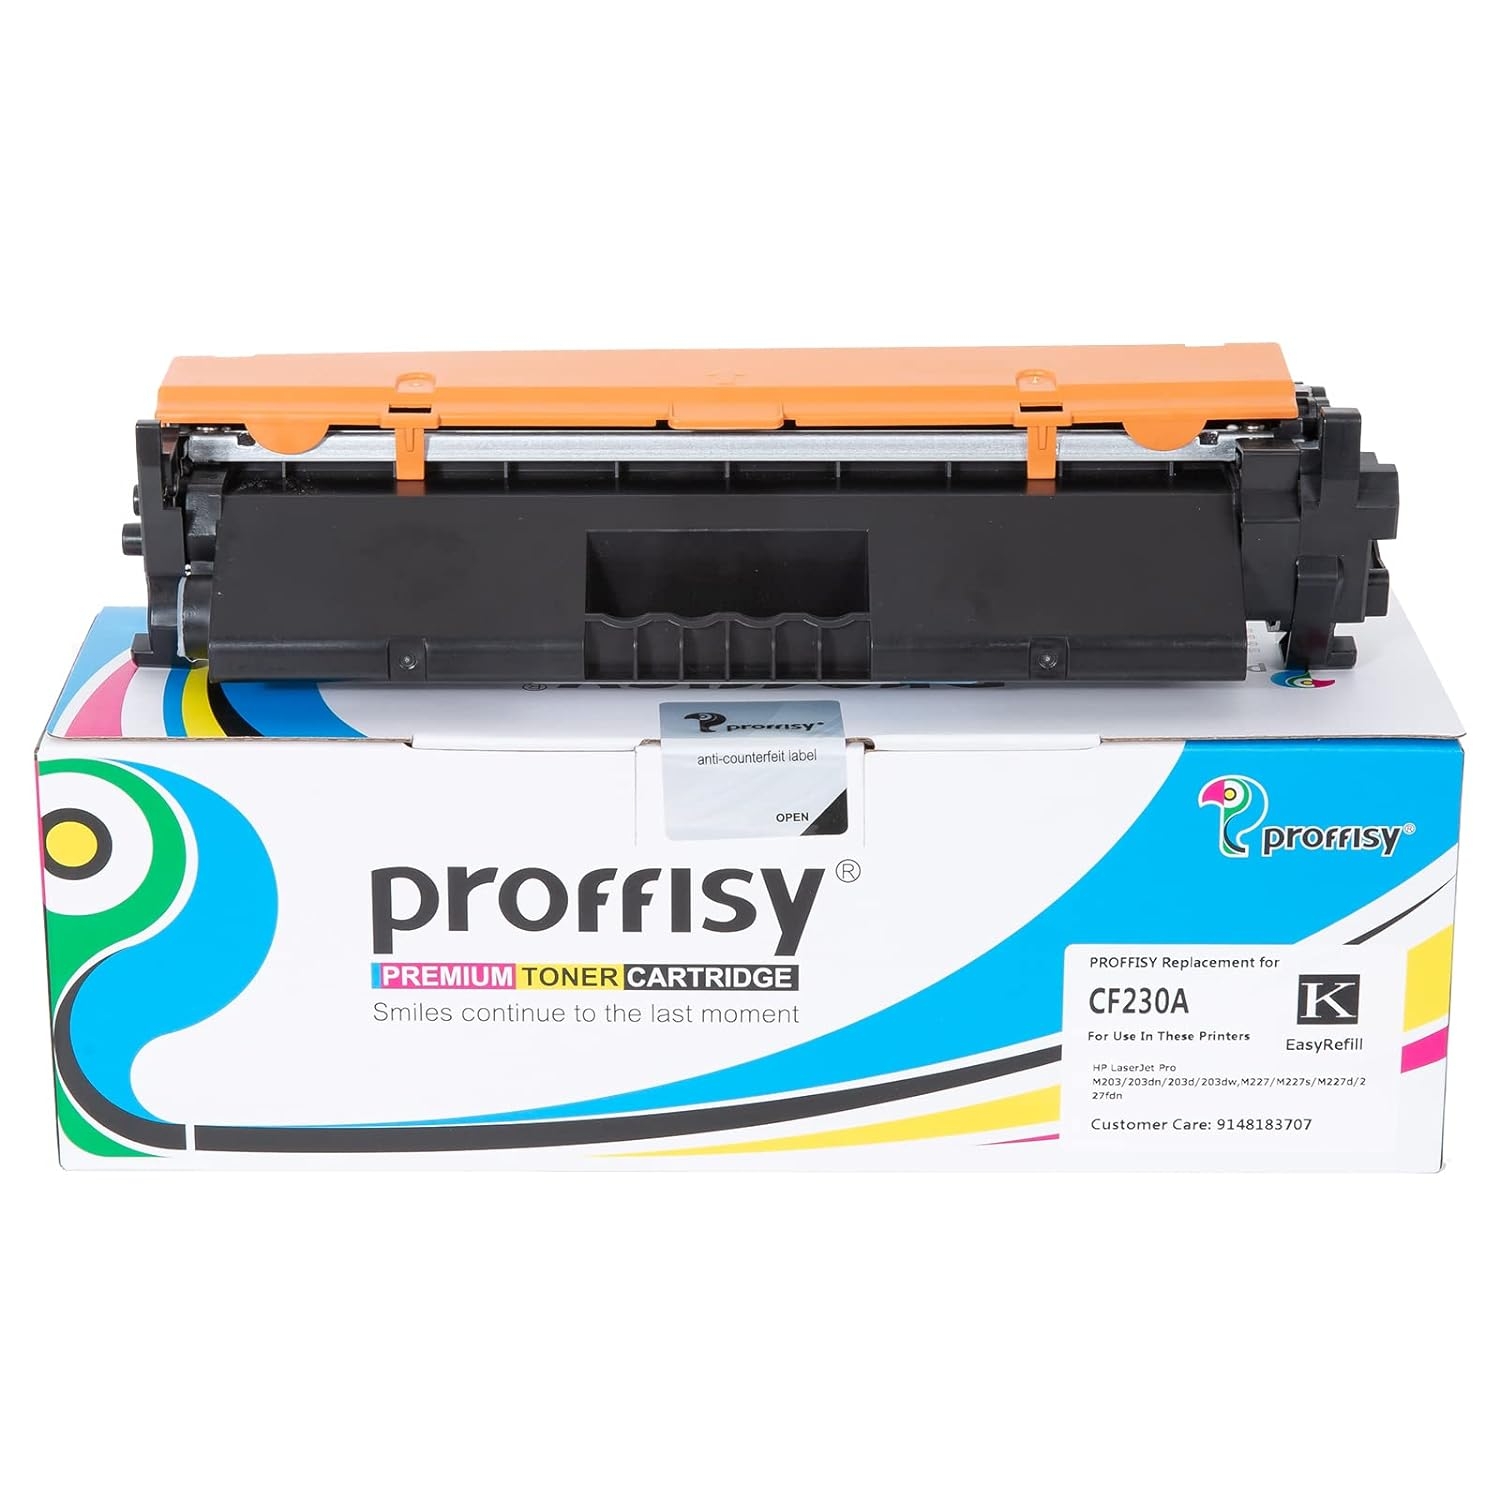 proffisy 30A Toner Cartridge Easy Refill for HP 30A CF230A Toner Cartridge for HP Laserjet Pro M203, M203d, M203dn, M203dw, M227, M227s, M227d, M227fdn, M227fdw, M227sdn MFP, High Pages Yield 2000 Pages-1PCS